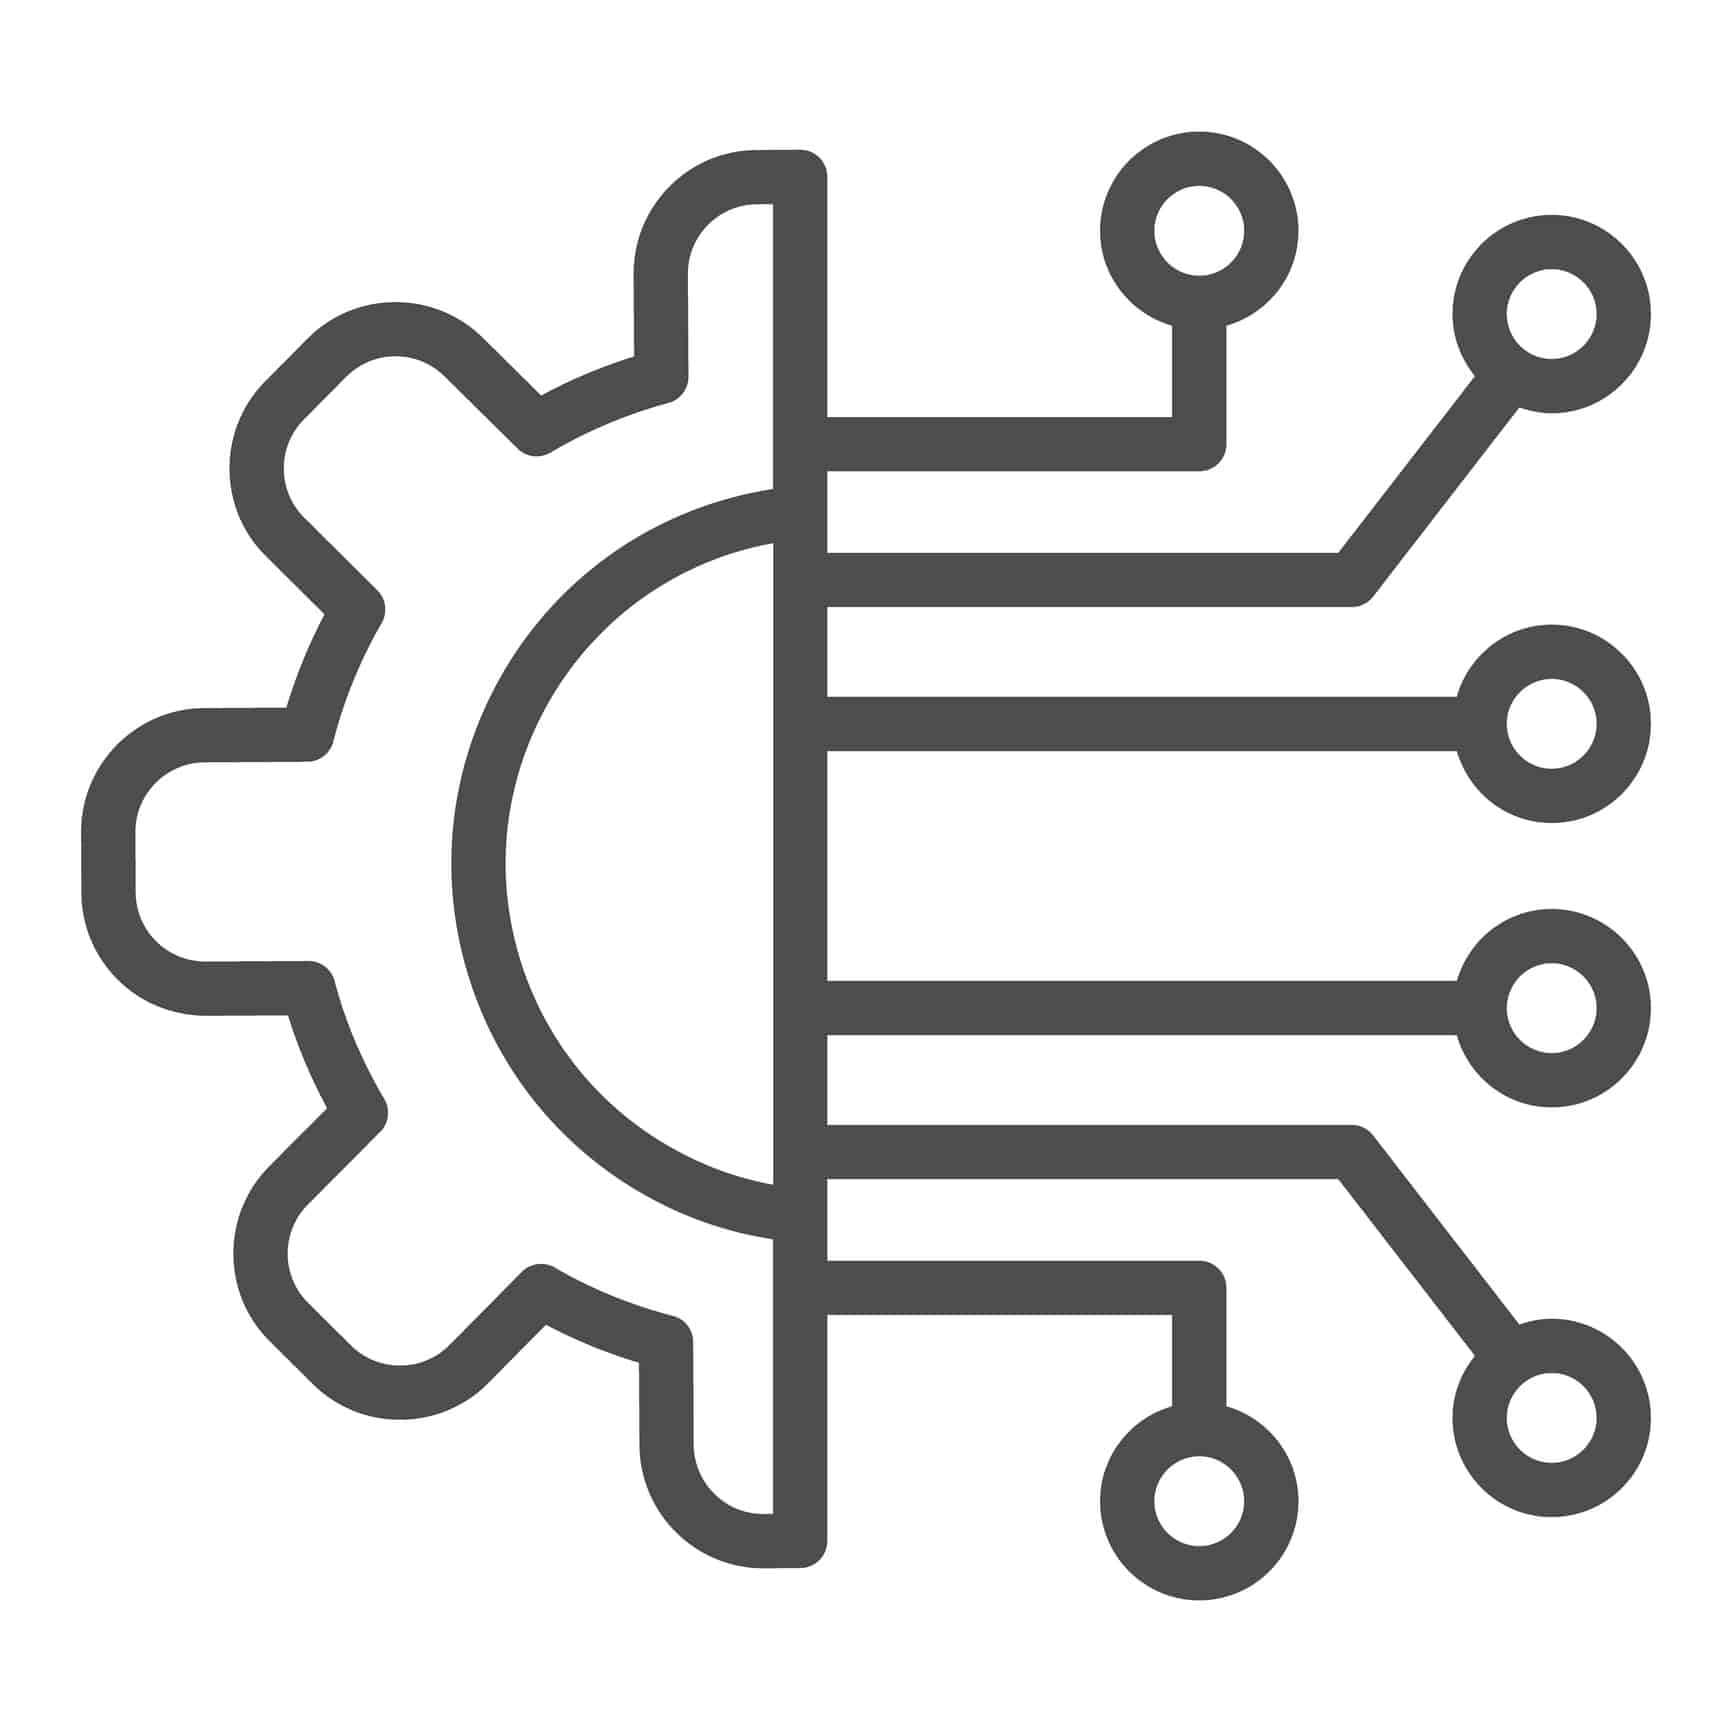 Gear connection line icon. Gear with chip circuit, hardware or software symbol, outline style pictogram on white background. Technology sign for mobile concept, web design. Vector graphics